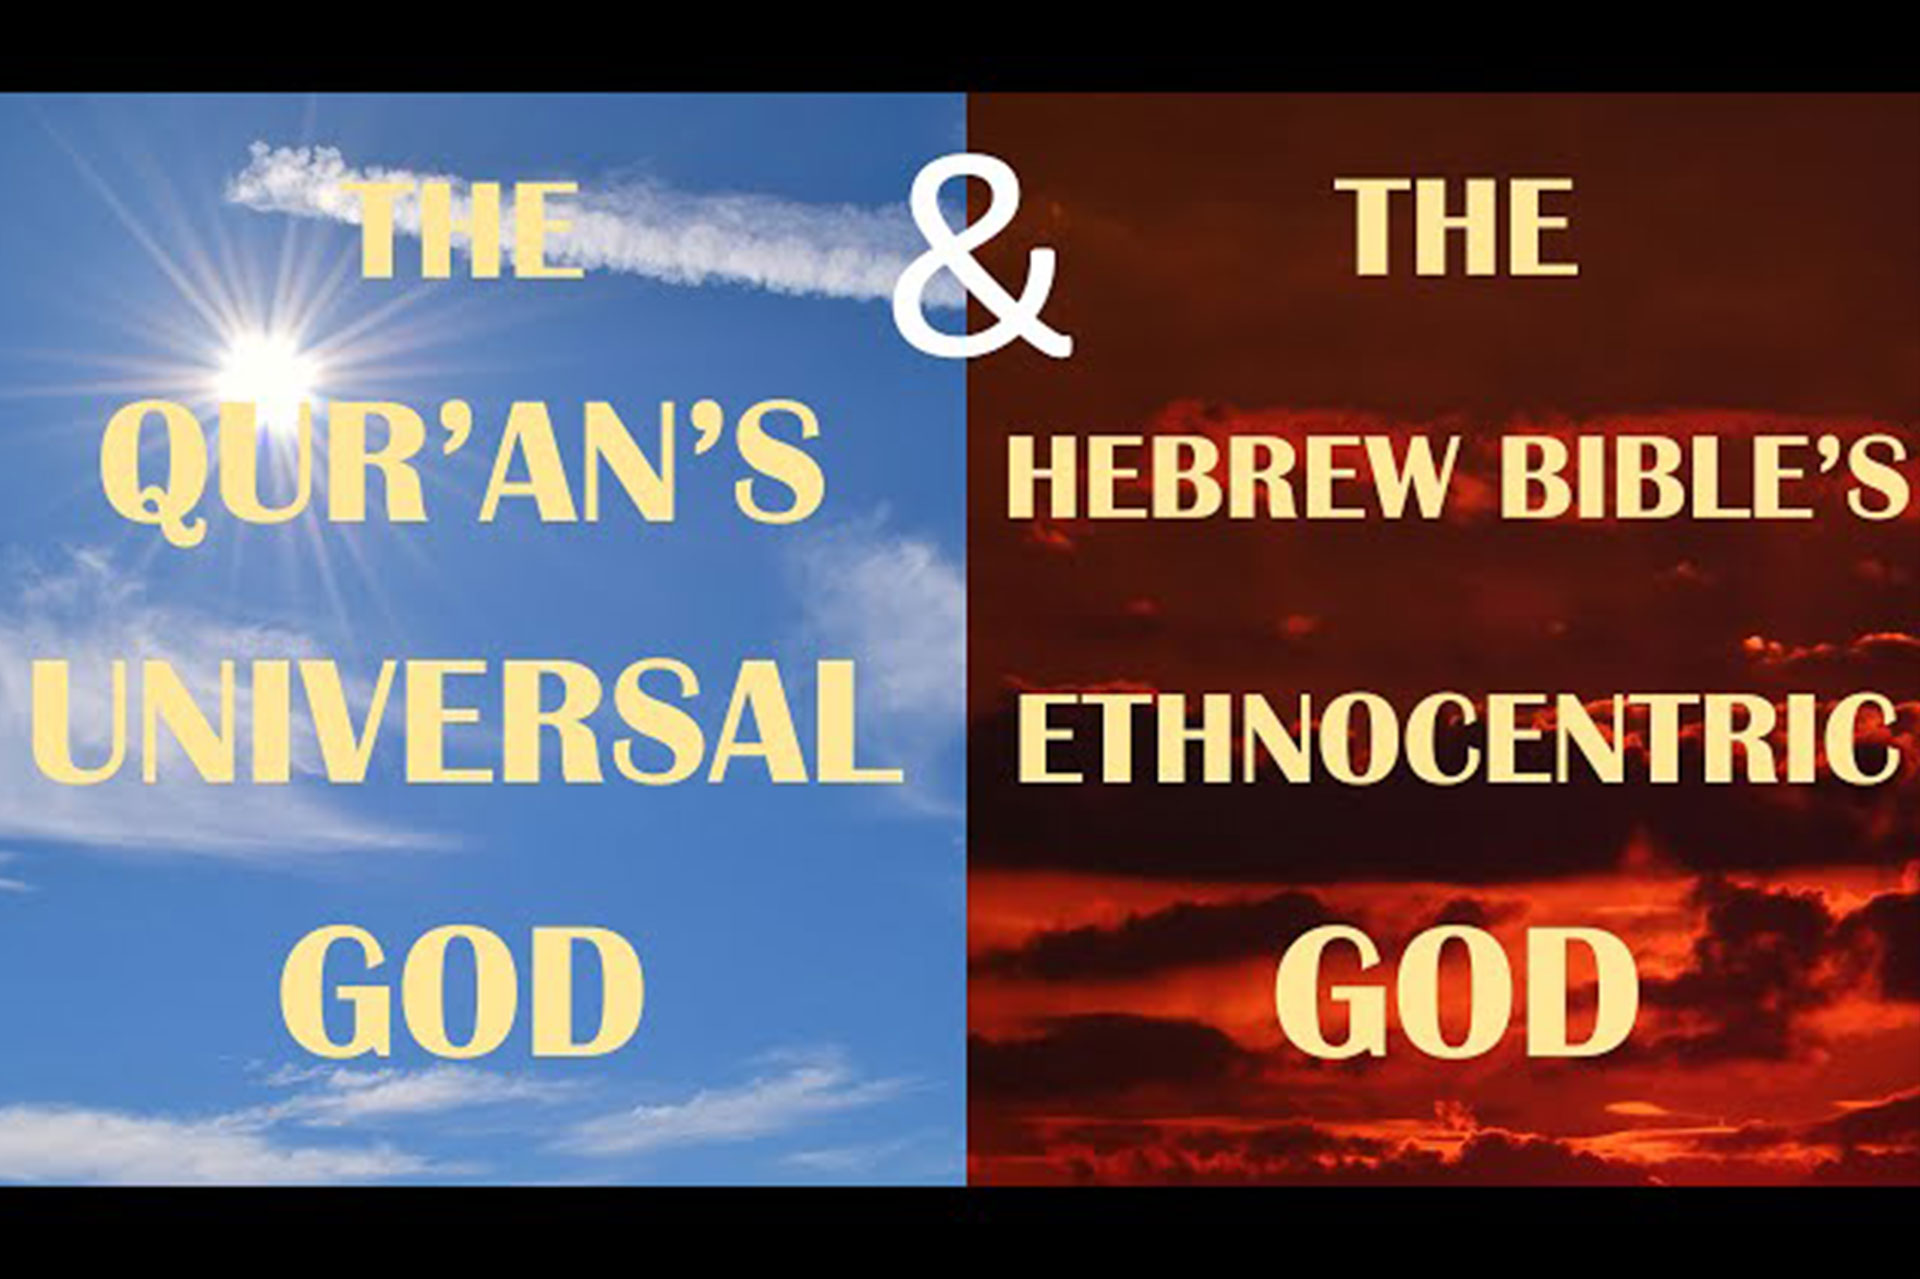 The Qur’an’s Universal God and the Old Testament’s Ethnocentric God